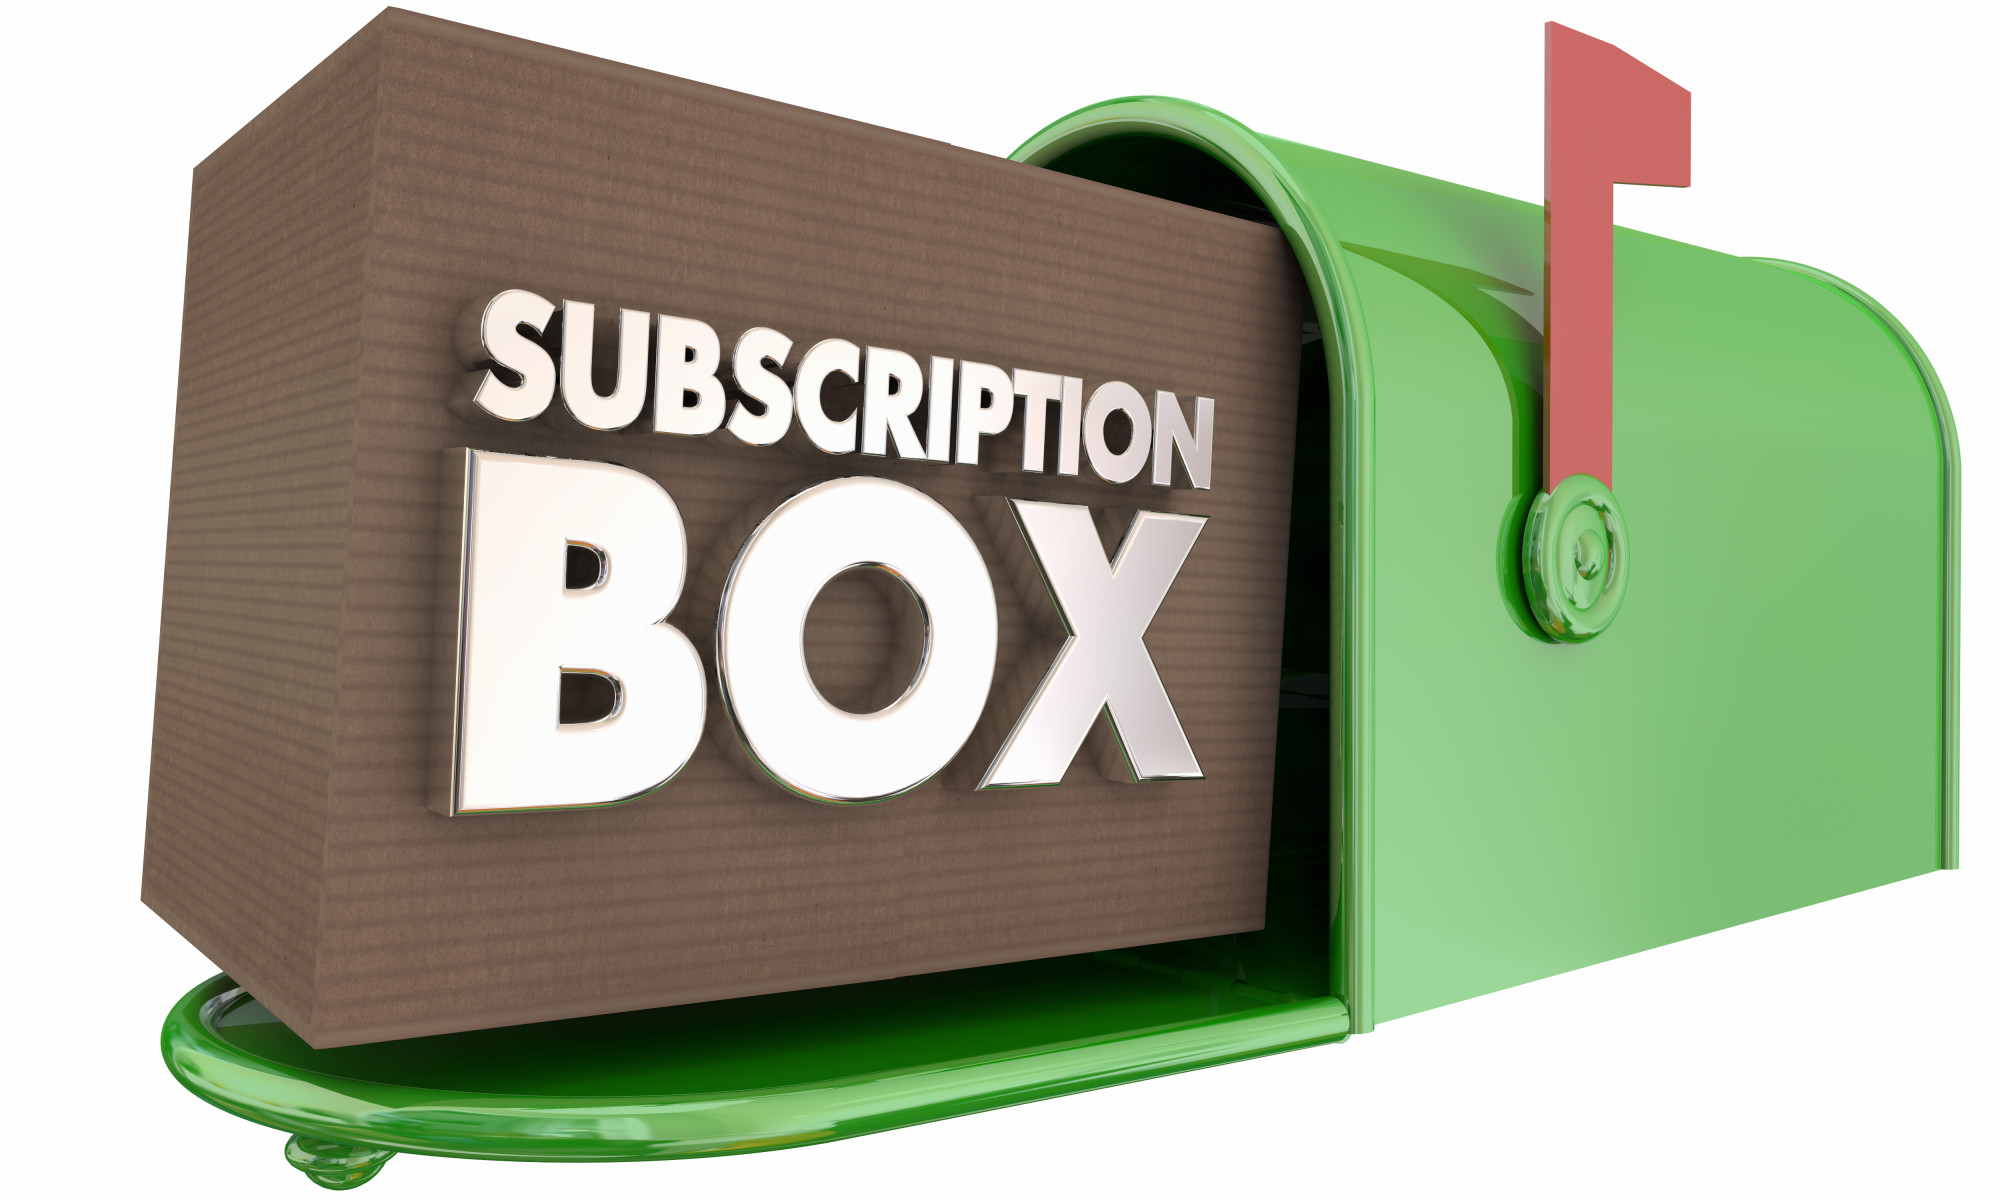 Subscription Box Business